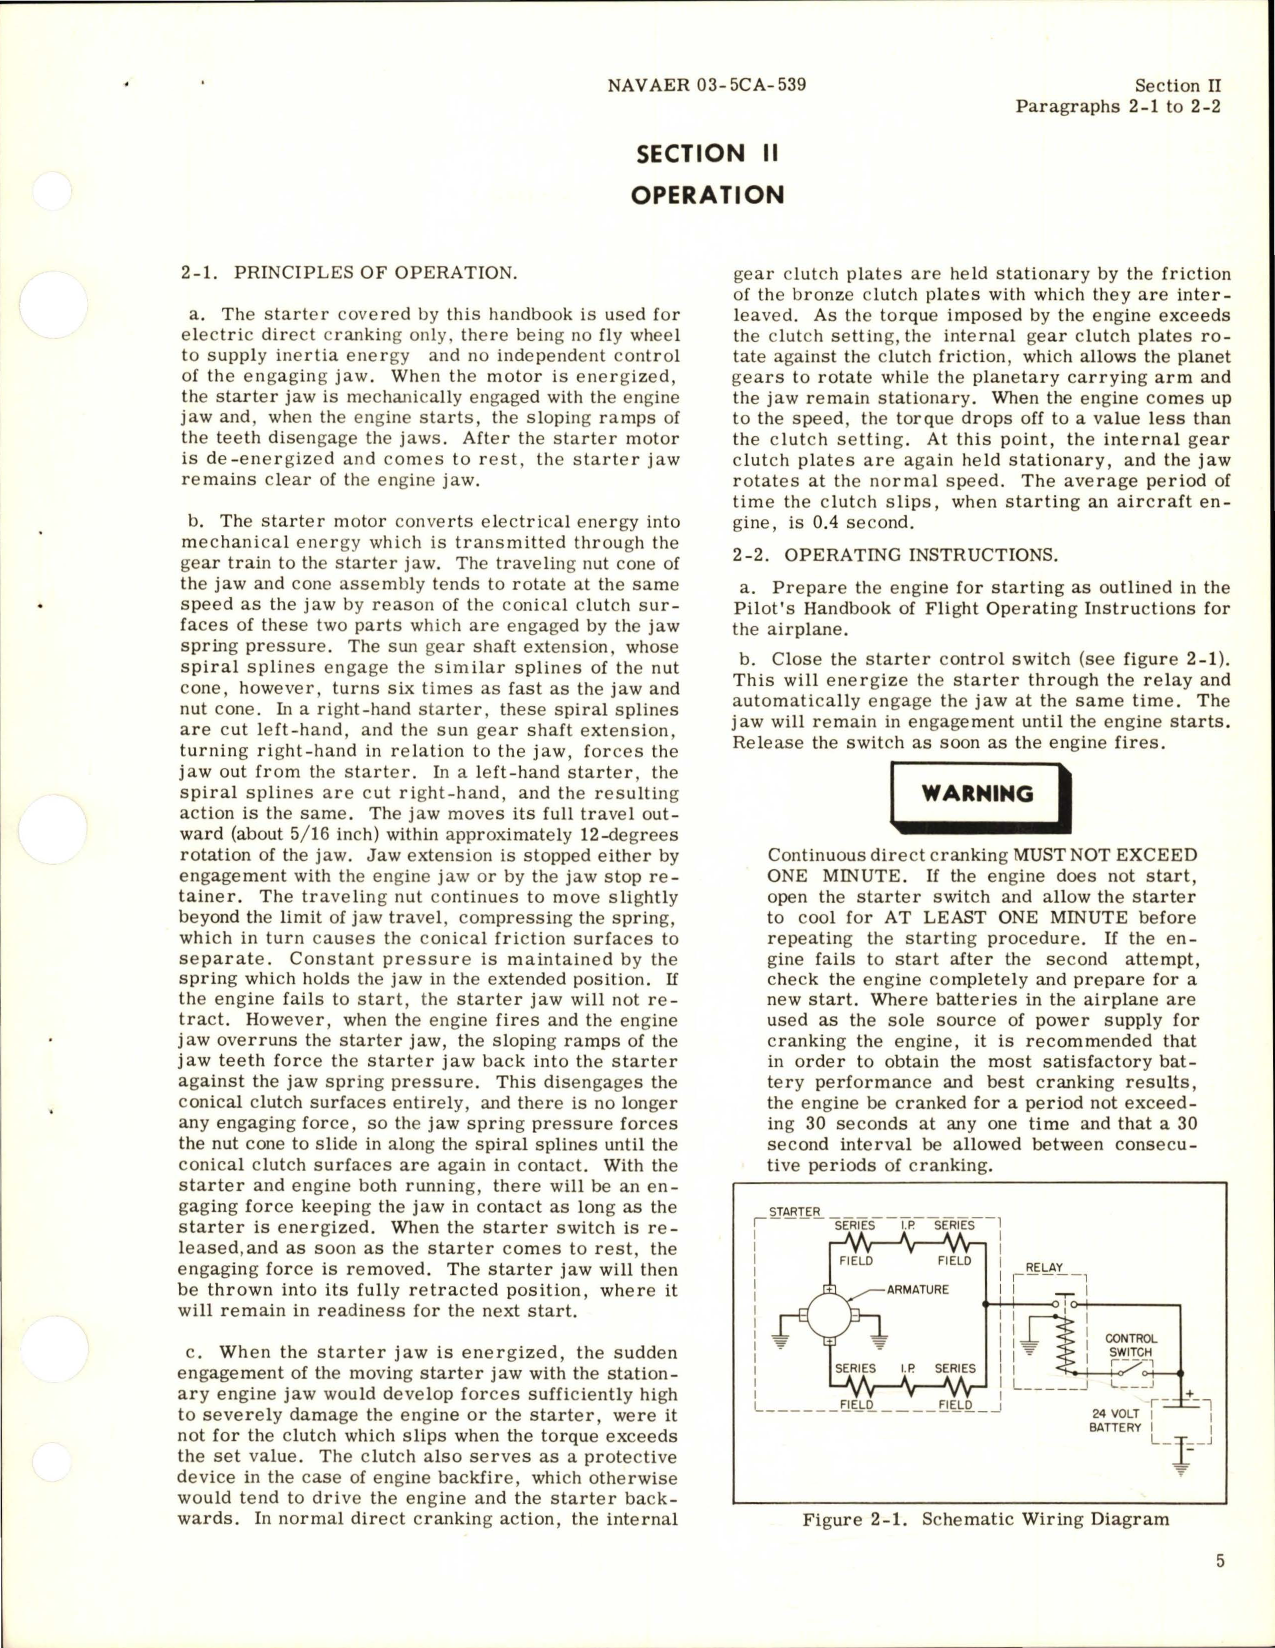 Sample page 9 from AirCorps Library document: Operation and Service Instructions for Aircraft Engine Starter - Model JH 6 Series